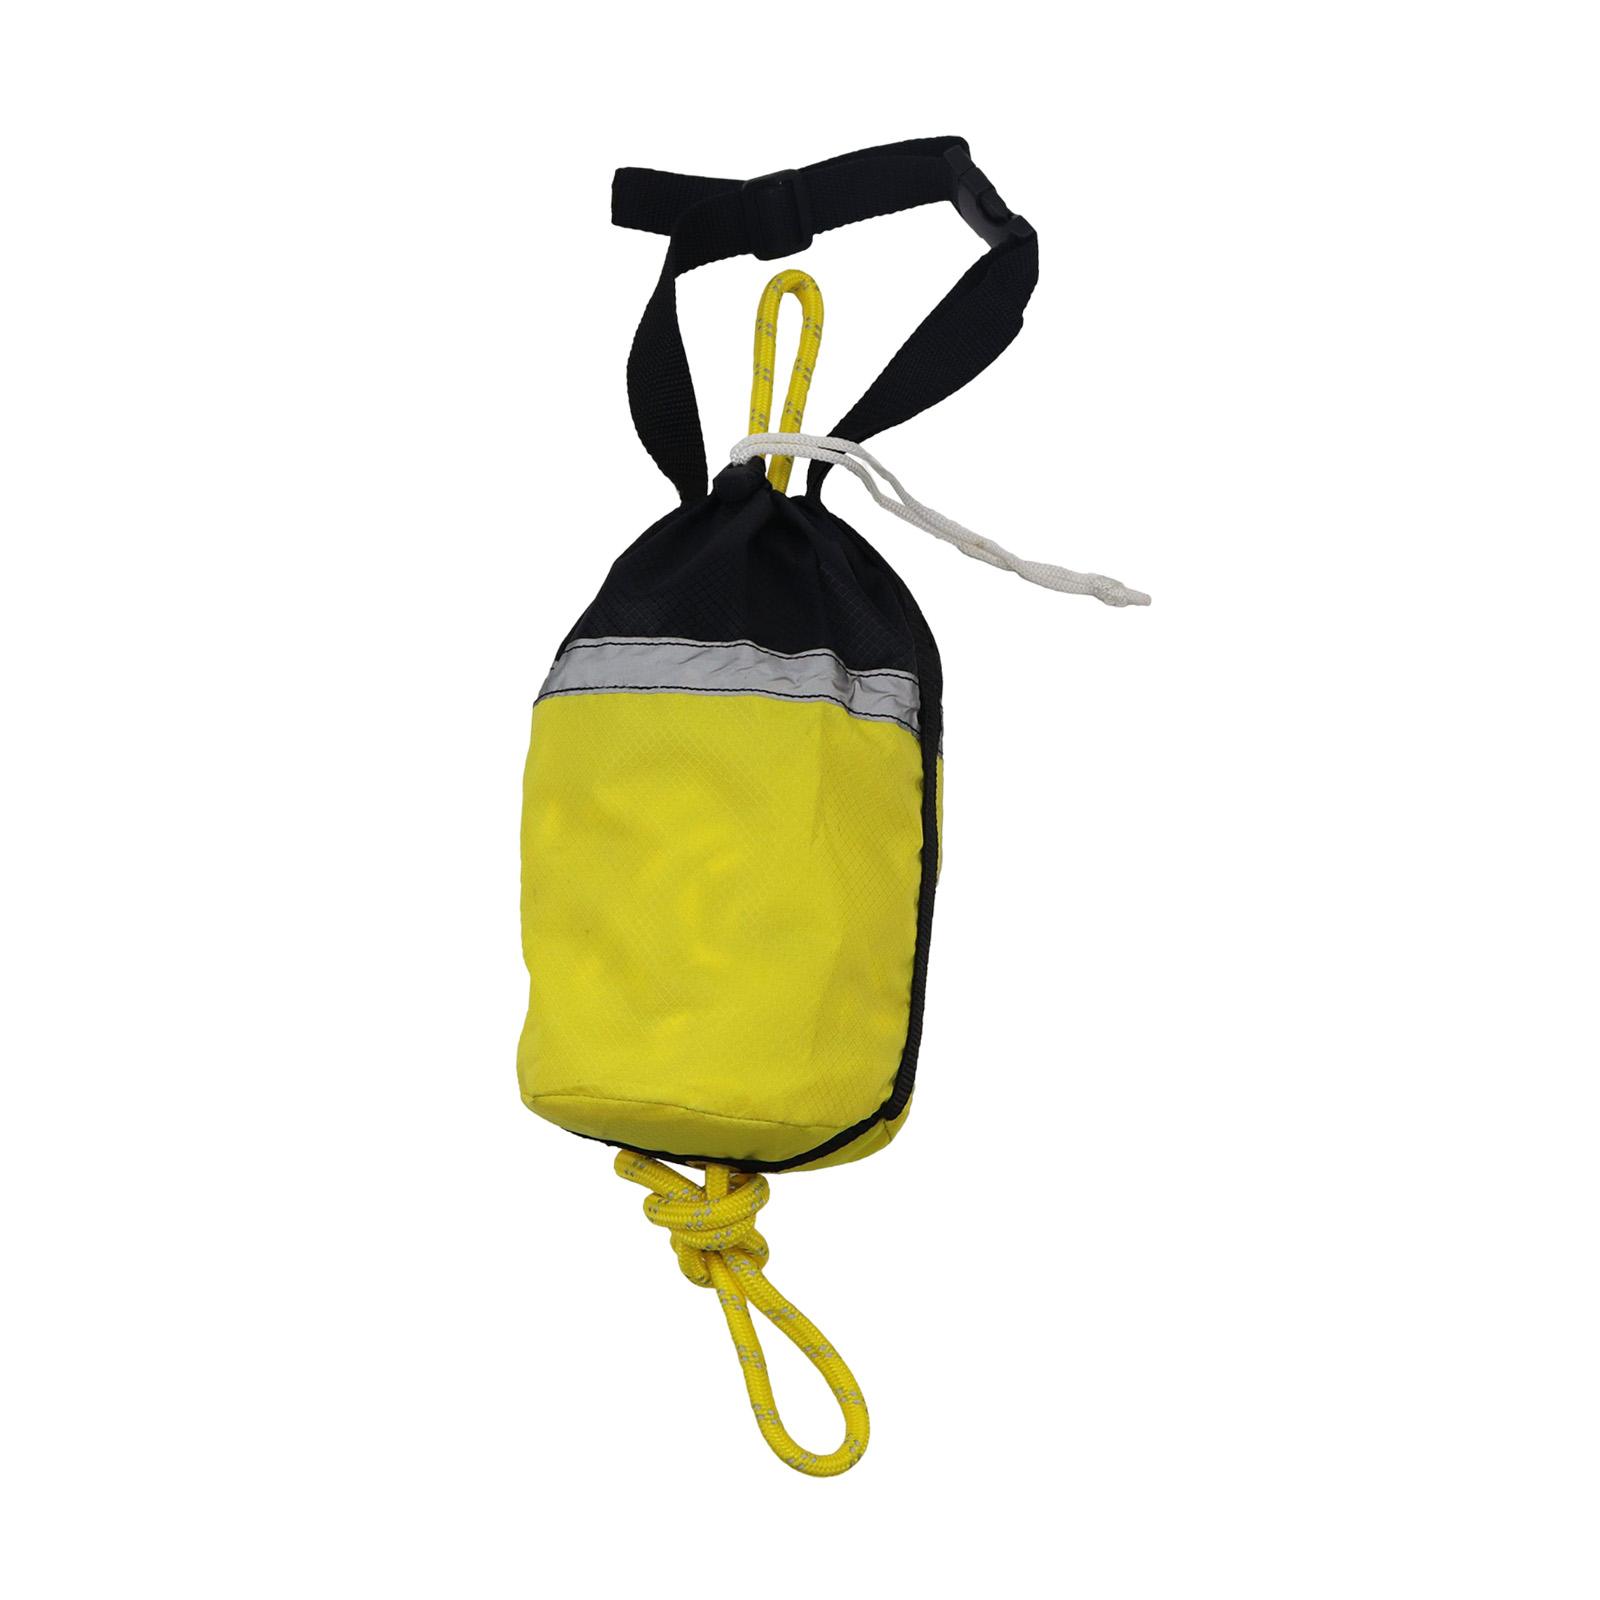 Rescue Throw Bag, Floating Rope Polypropylene Throwing Line Throwable Safety